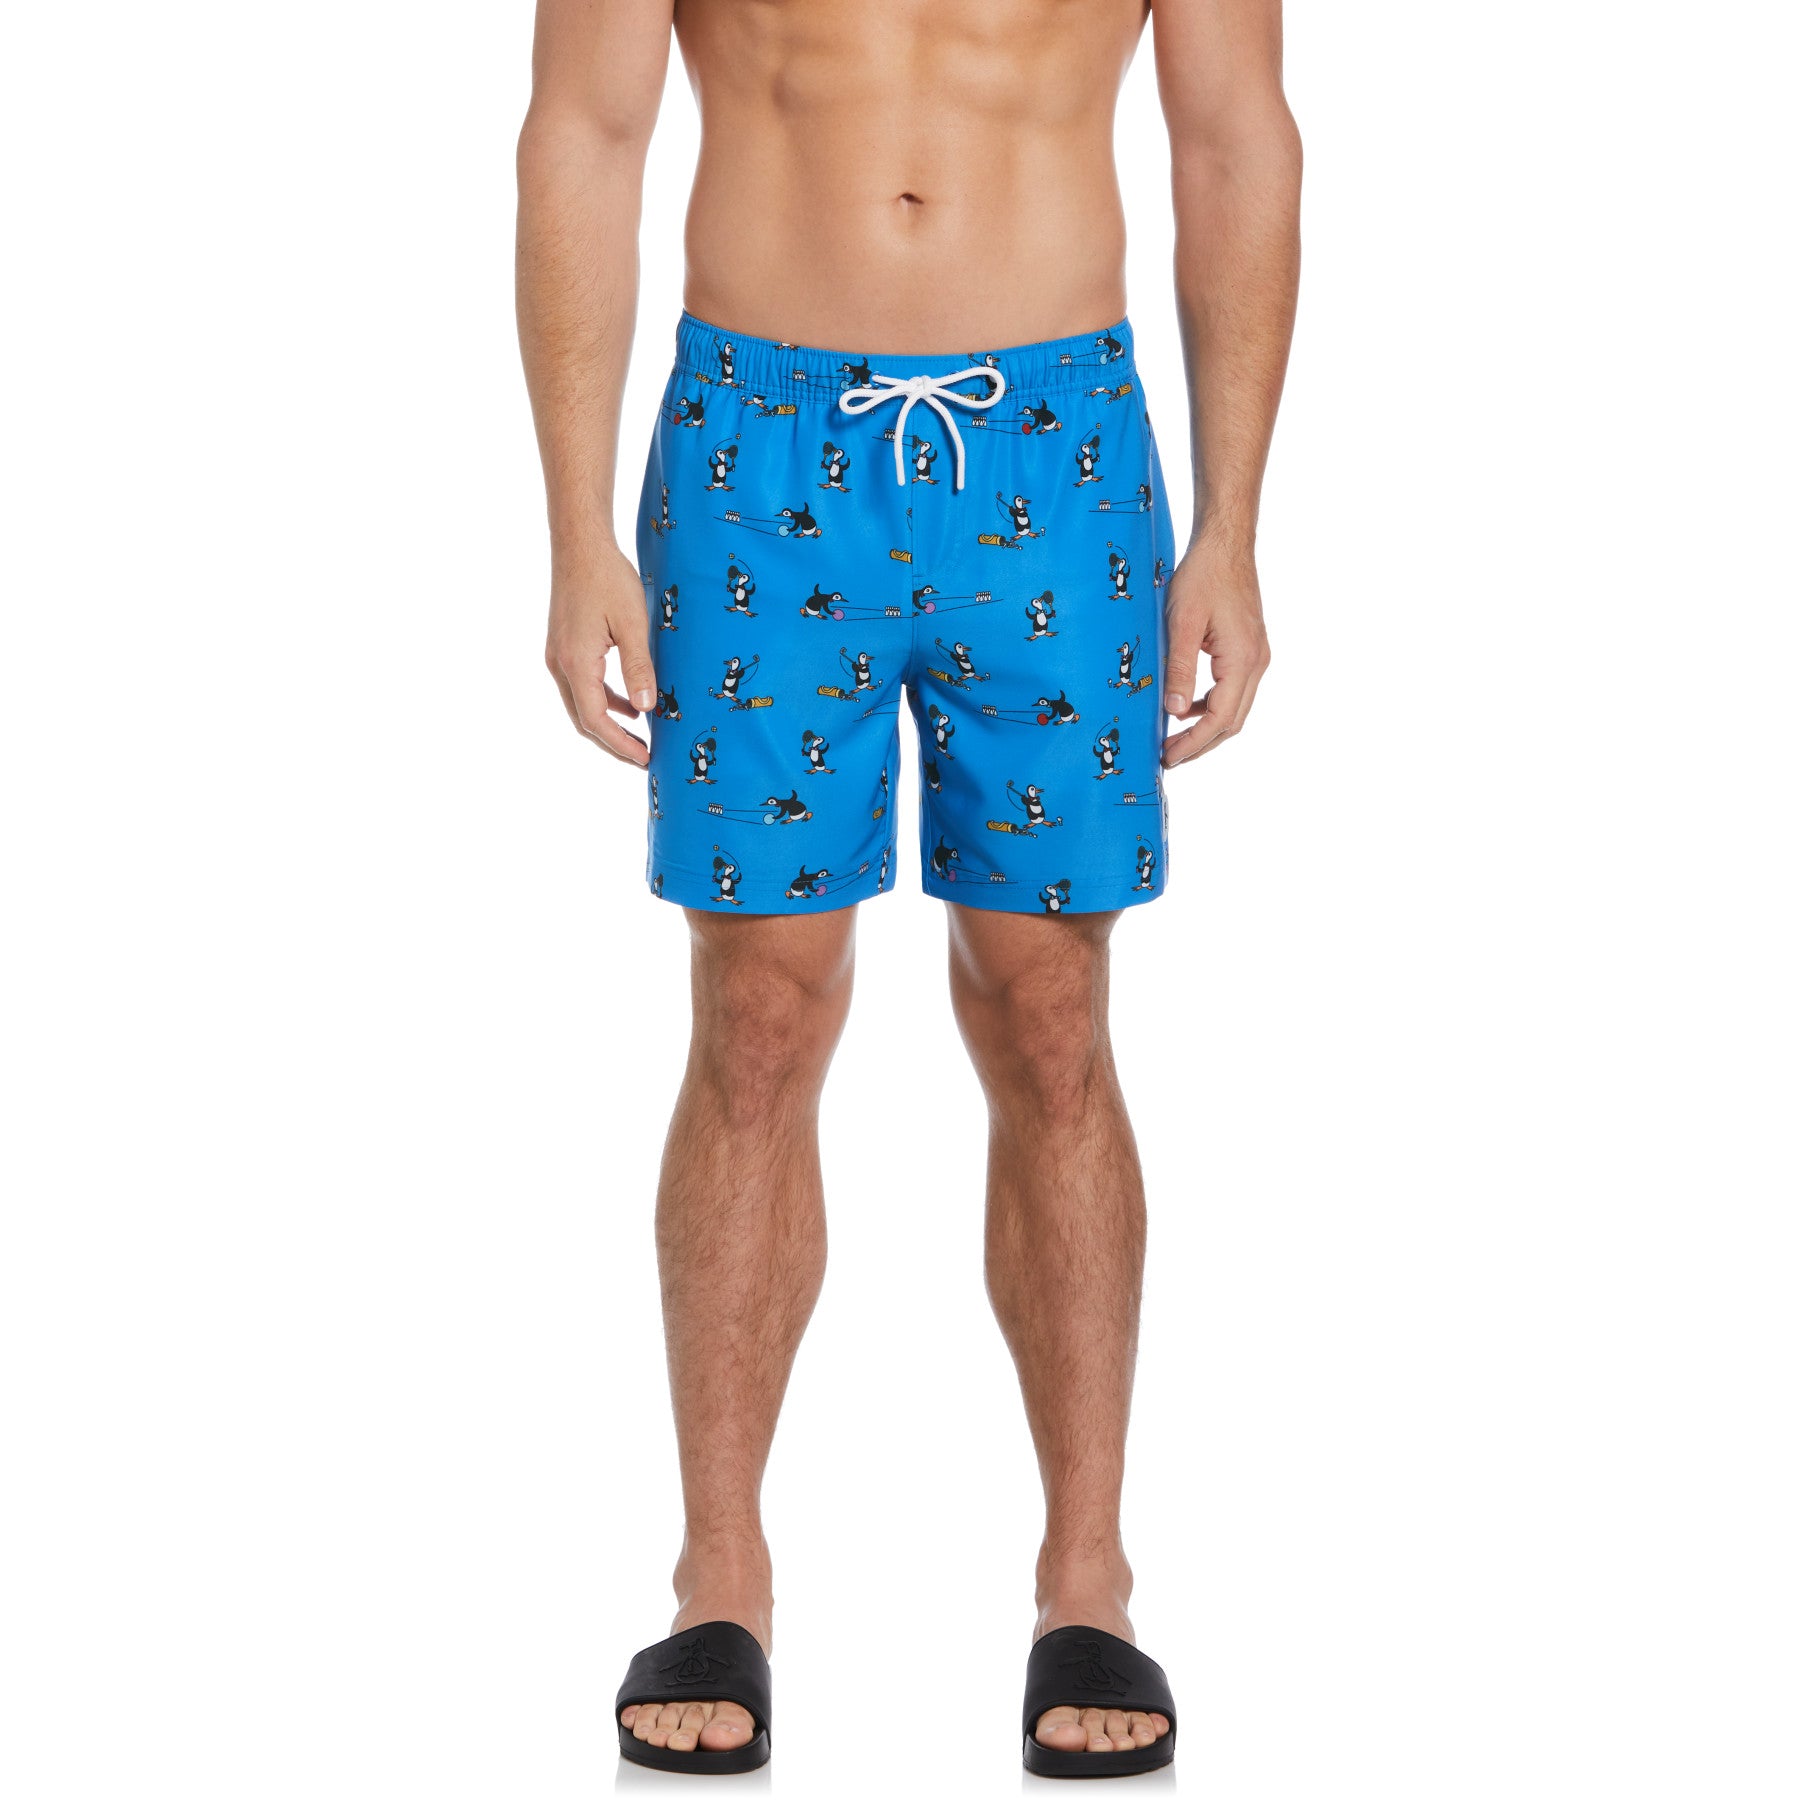 View Pete Print Stretch Swim Shorts In French Blue information